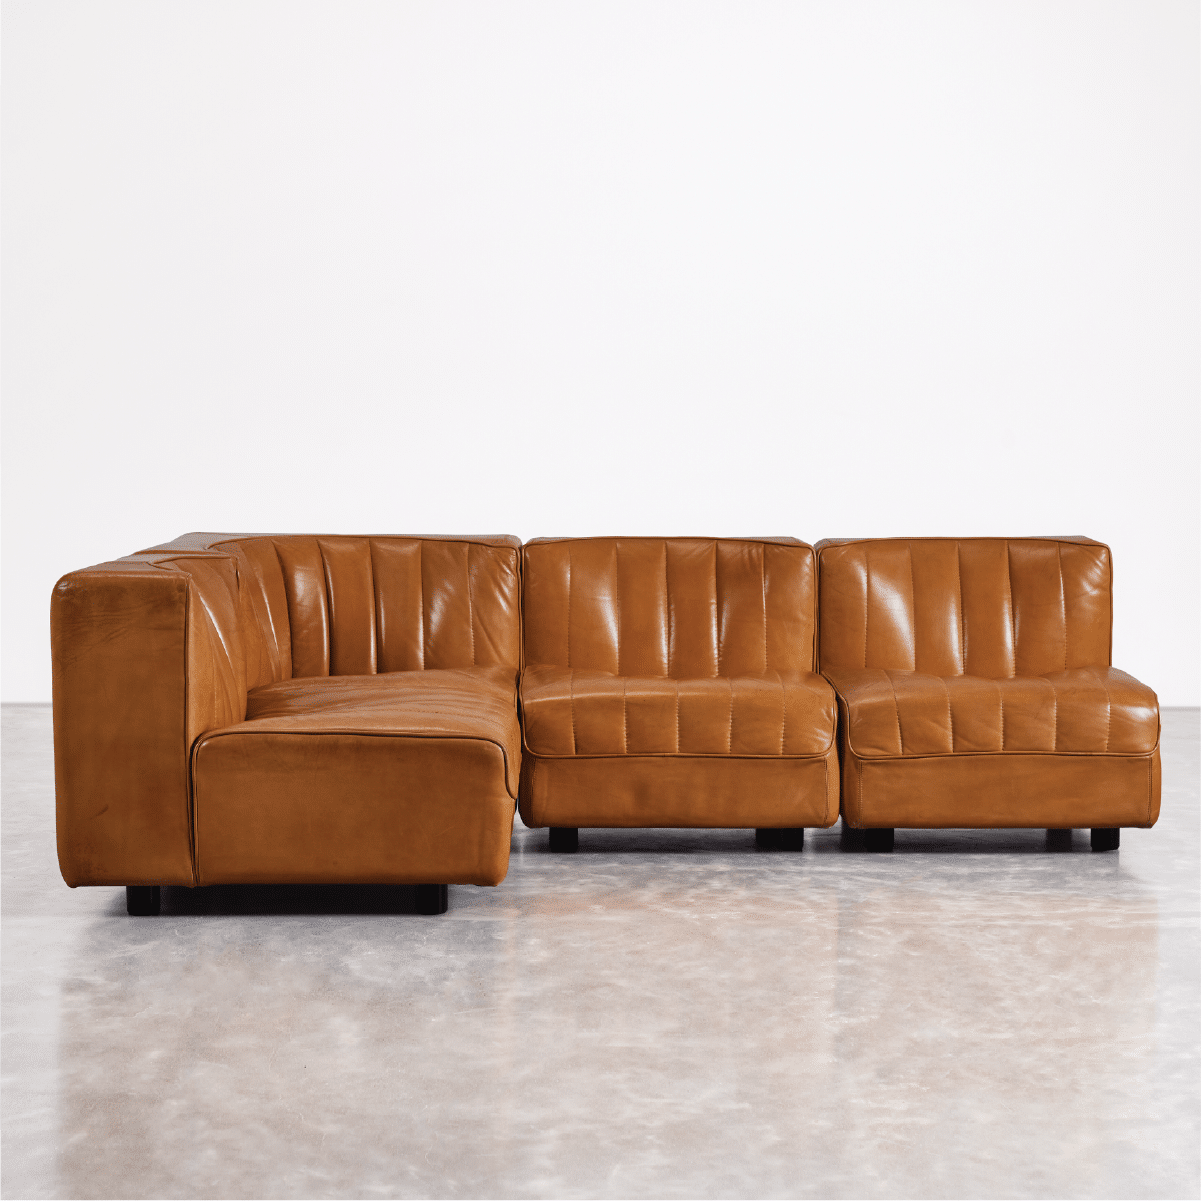 Low res for web_Element Leather Sofa_CoupXX